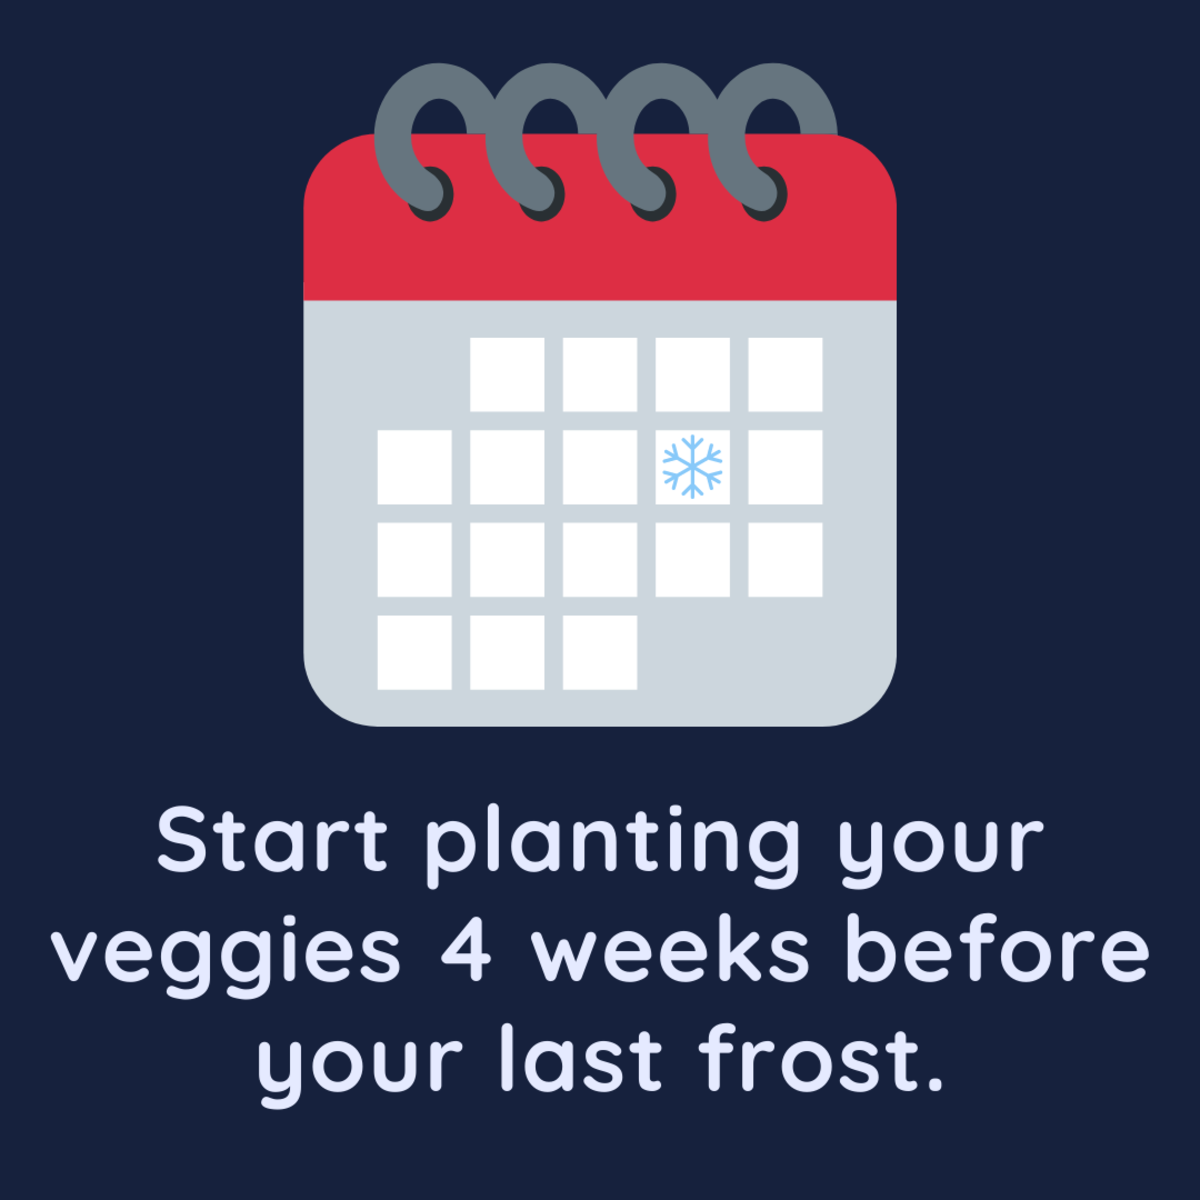 Frost tolerant veggies can go in the ground 4 weeks before your zone's last frost.